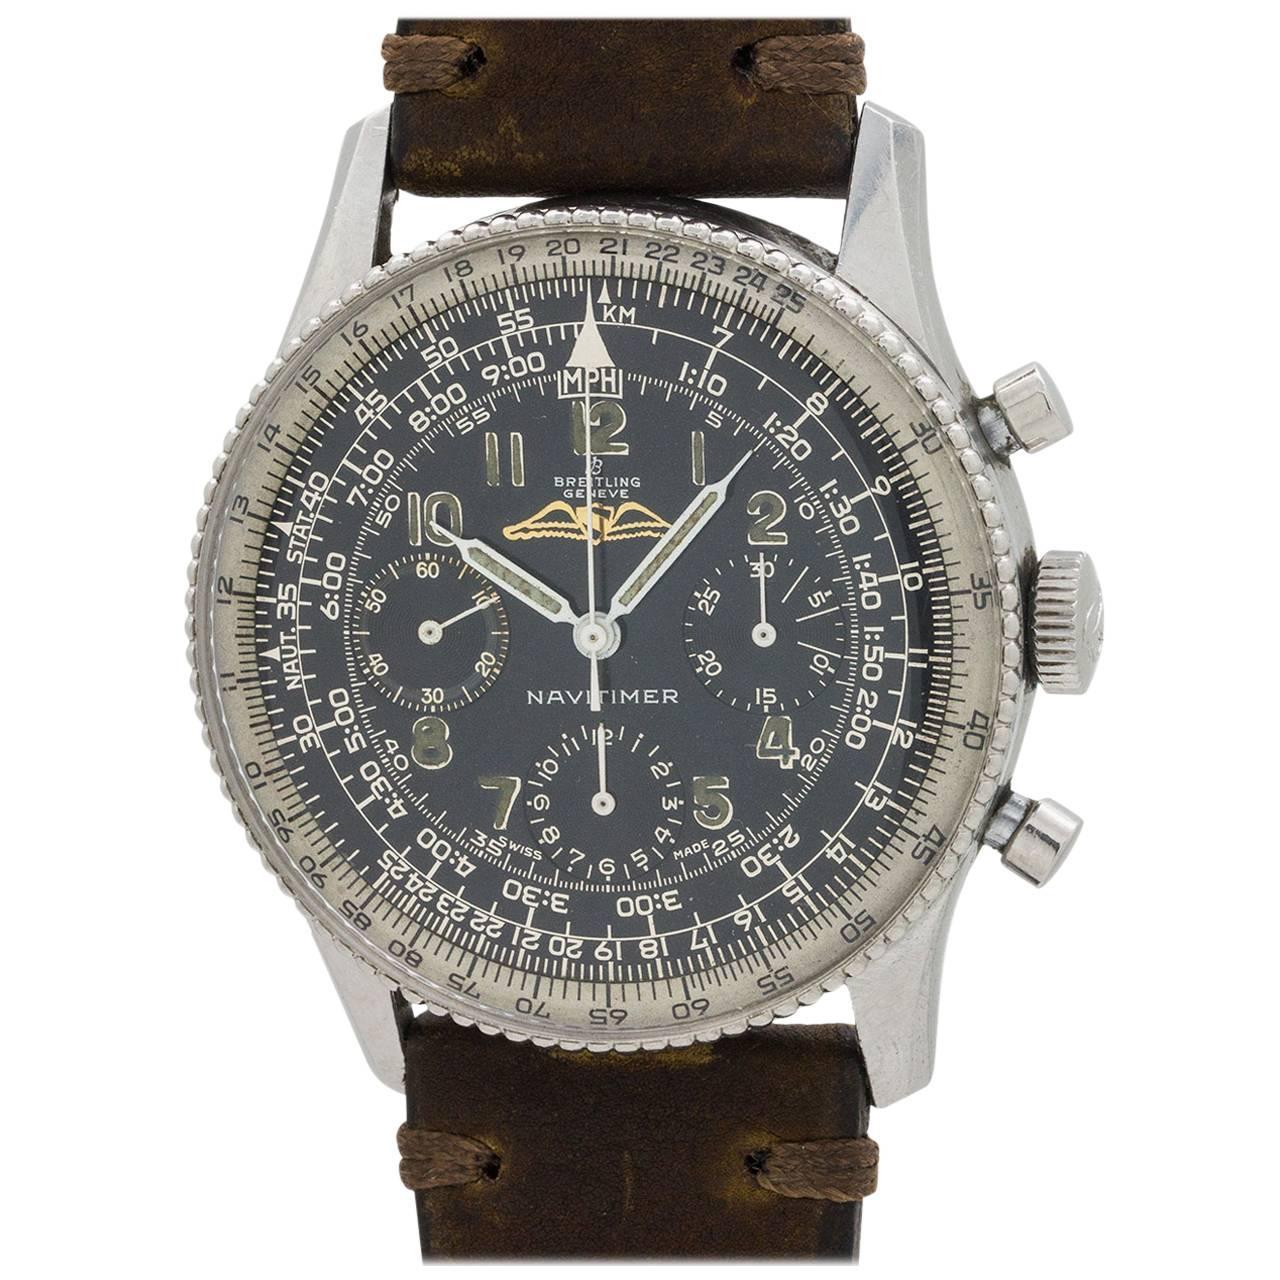 Checking breitling serial numbers